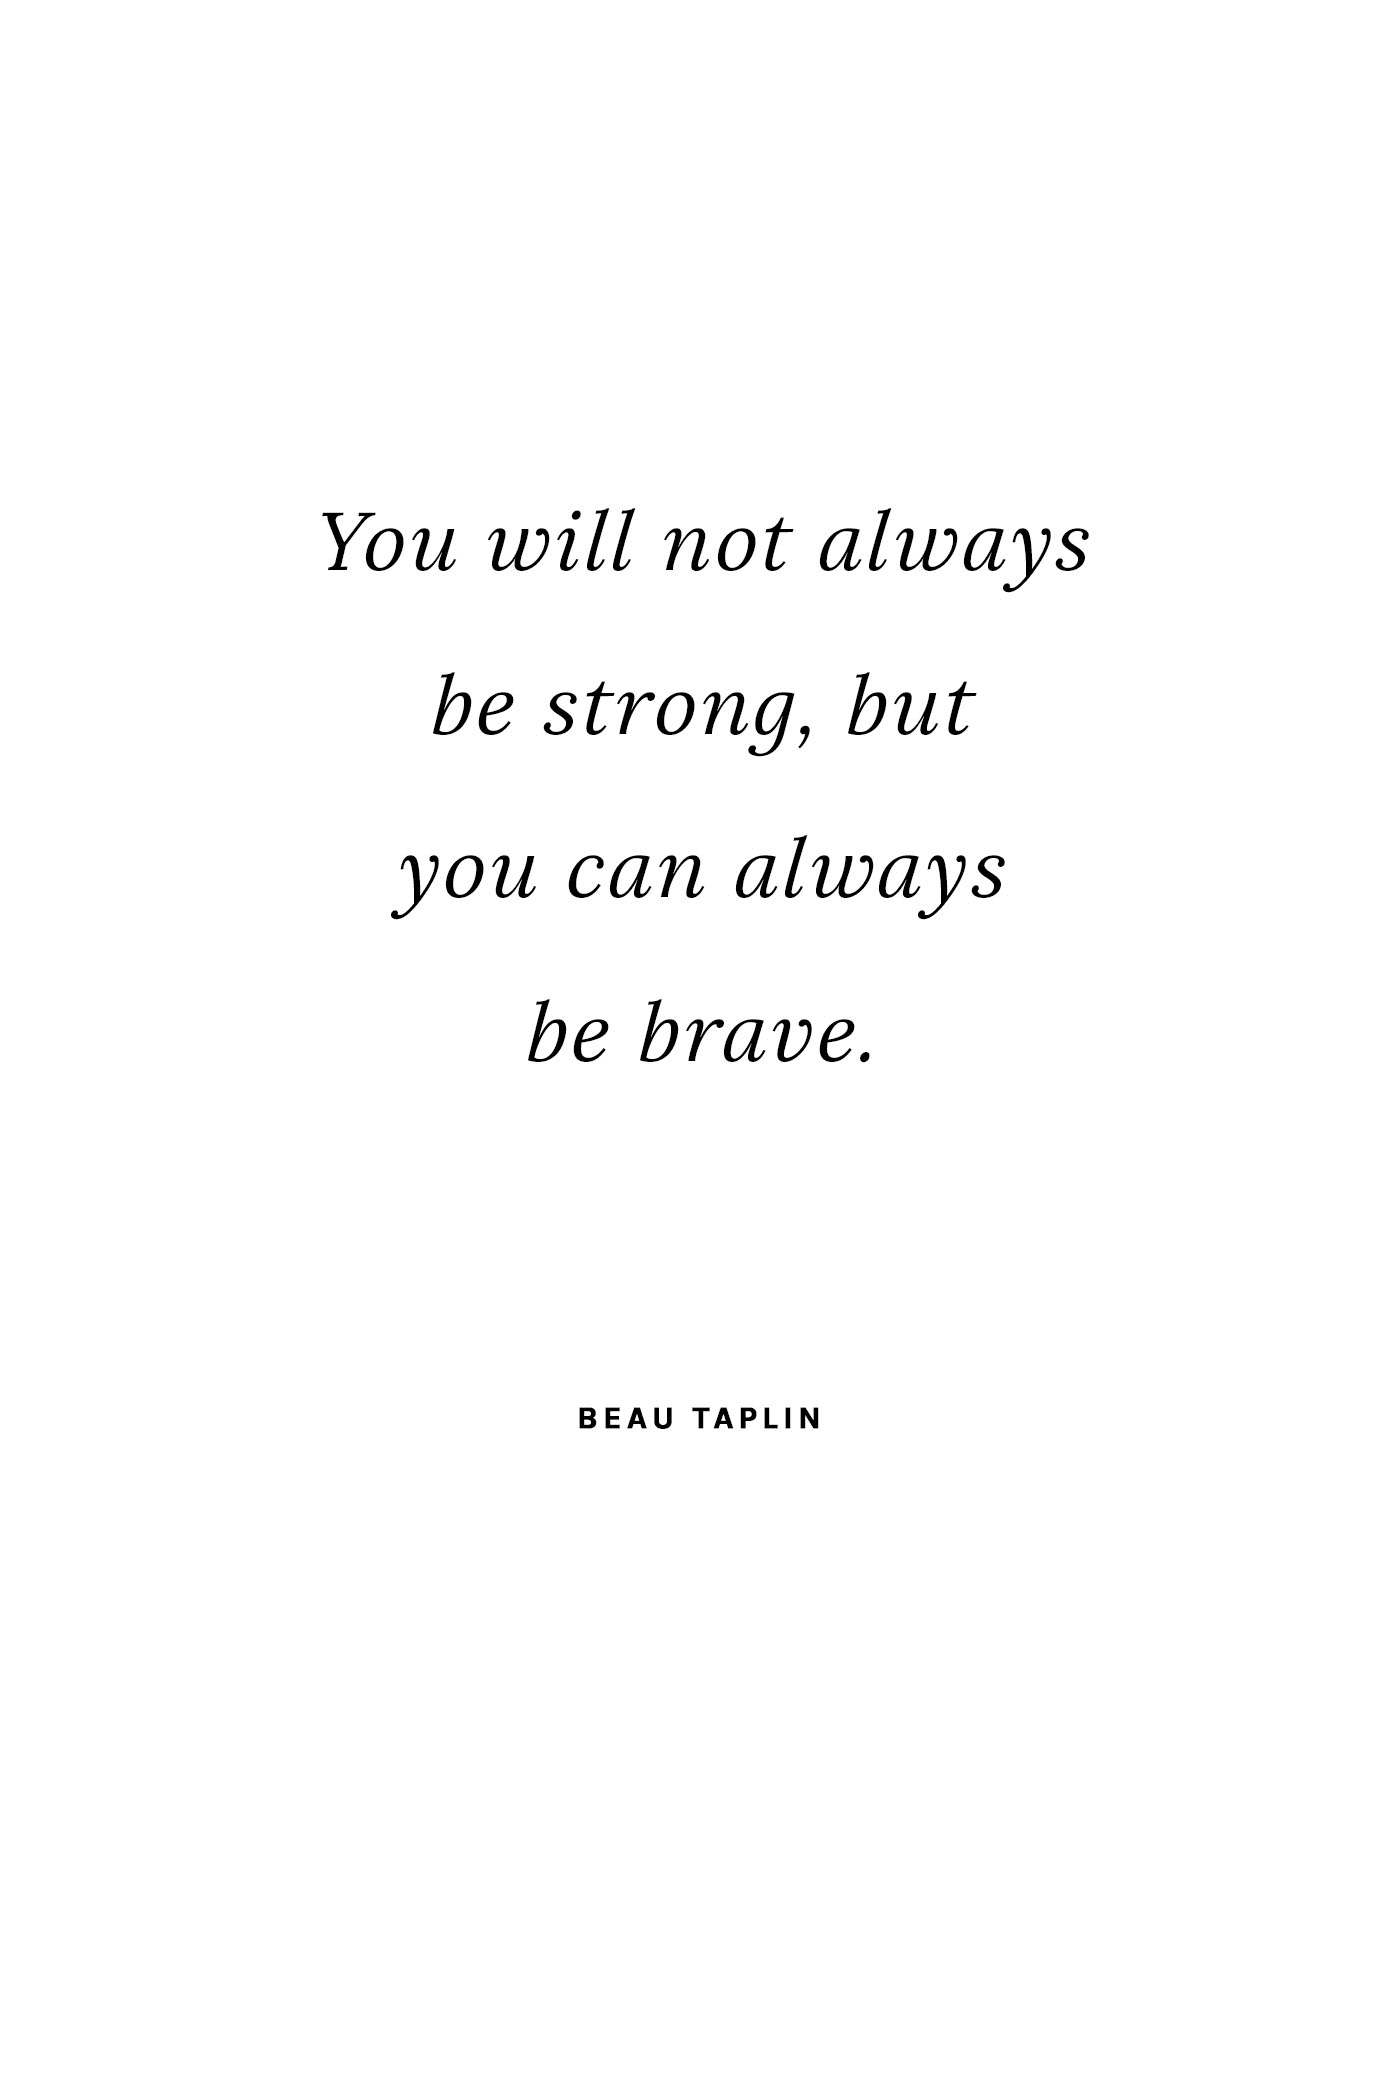 "You will not always be strong, but you can always be brave." - Beau Taplin - 5 Inspiring Quotes for a Positive Lifestyle on Hej Doll